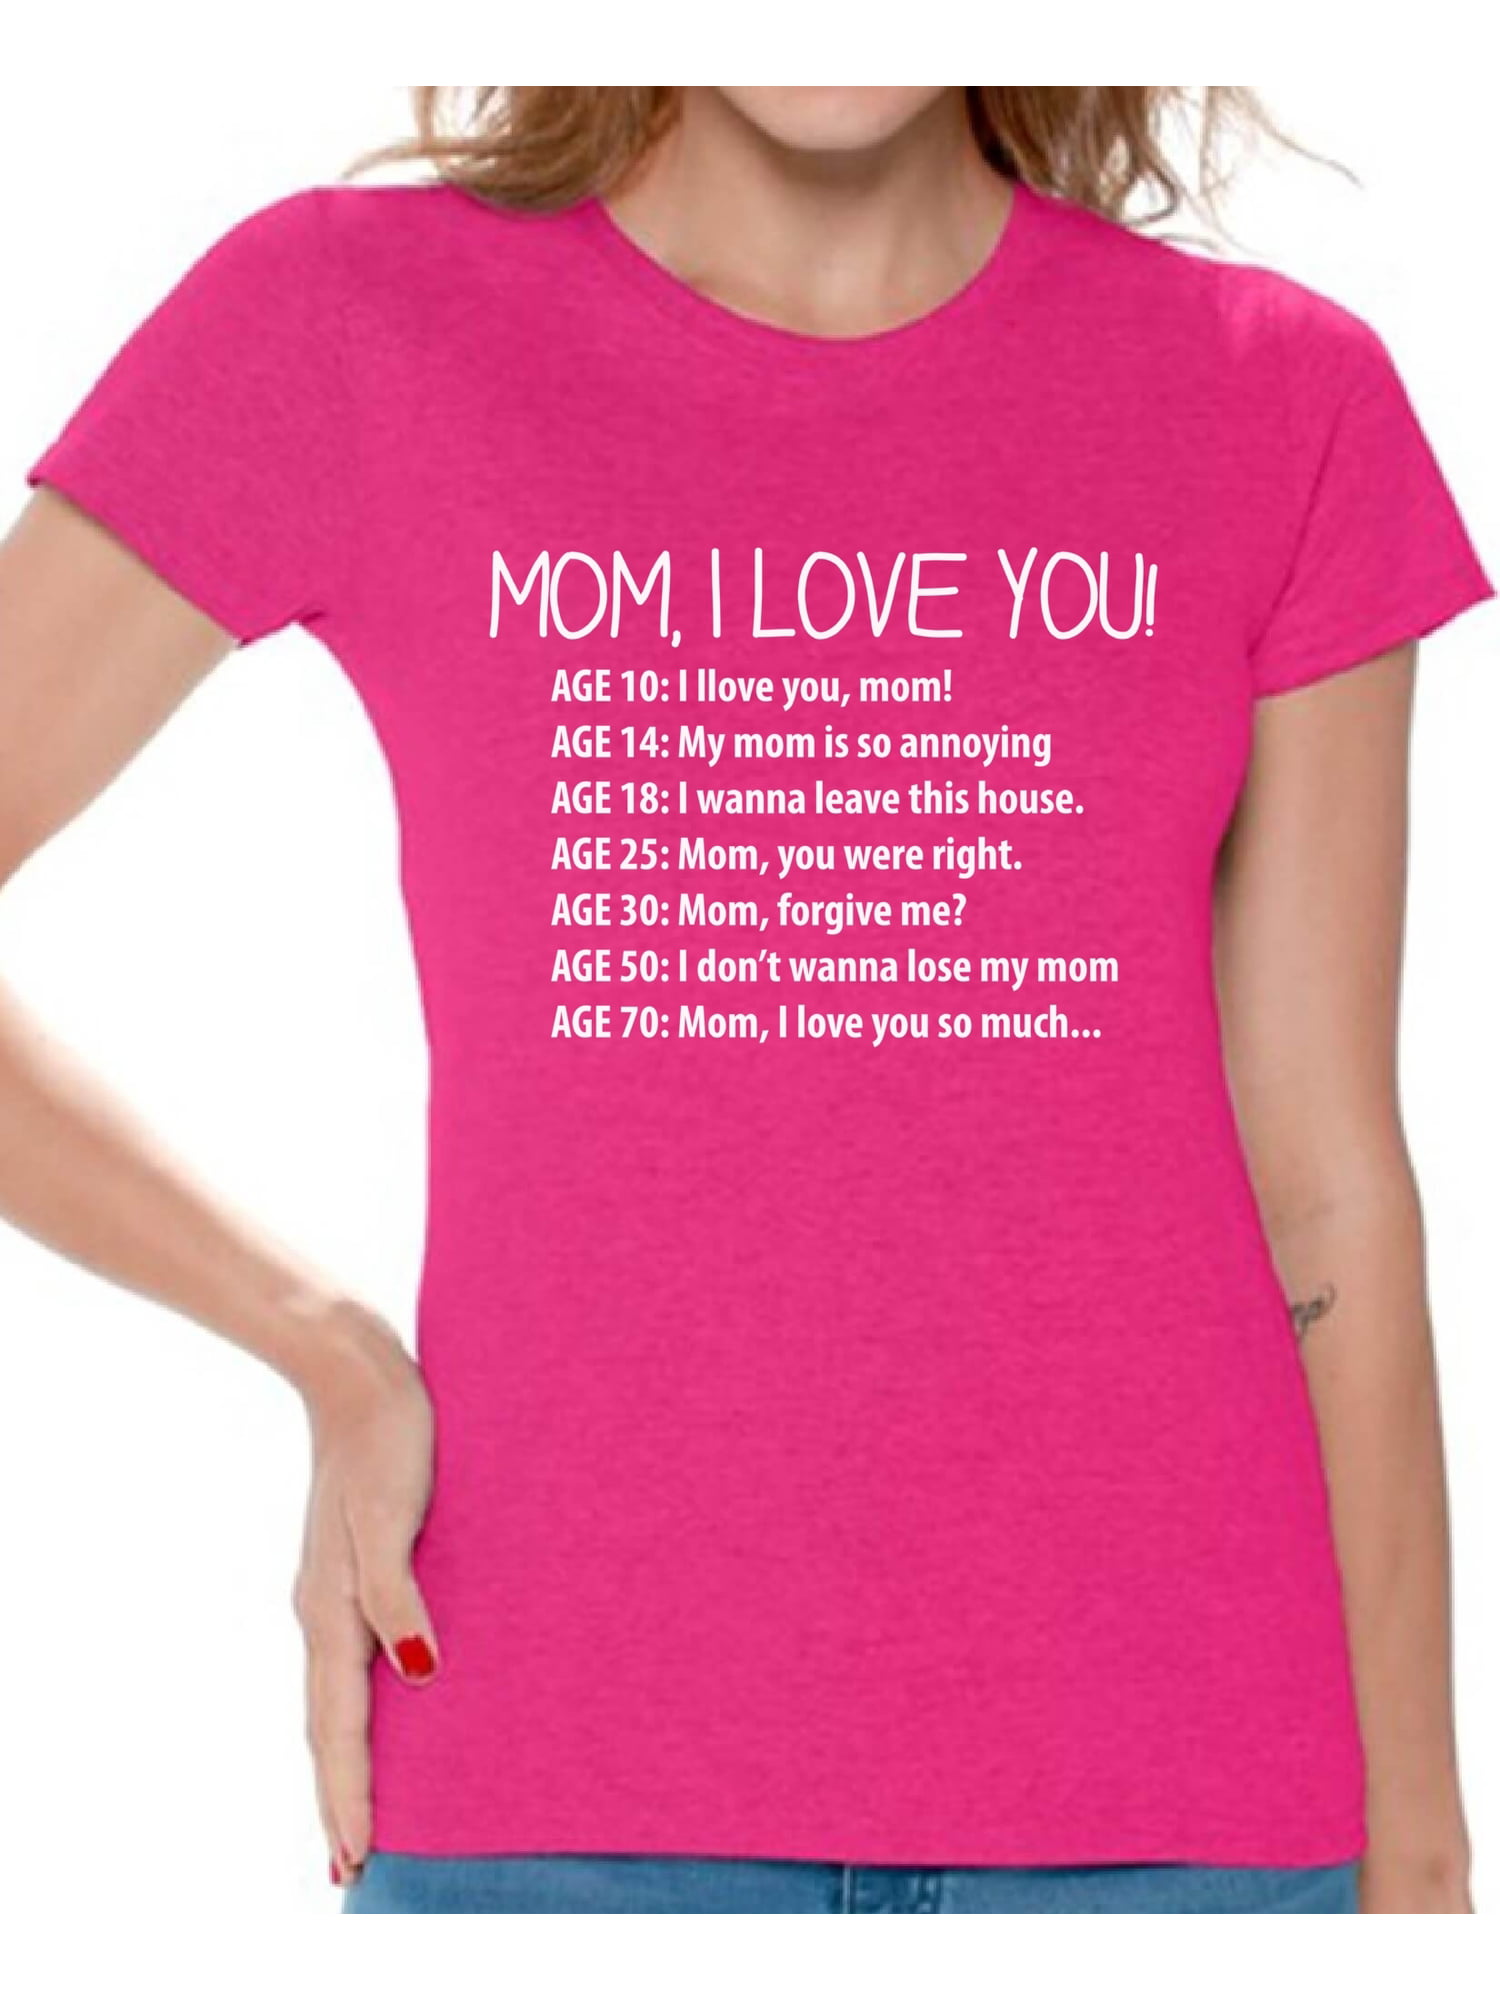 Mom T-Shirt  Cool mom Shirt  Mothers day Gift  Mother Gift  Mother T-Shirt  Gift for mom  cool mom shirt